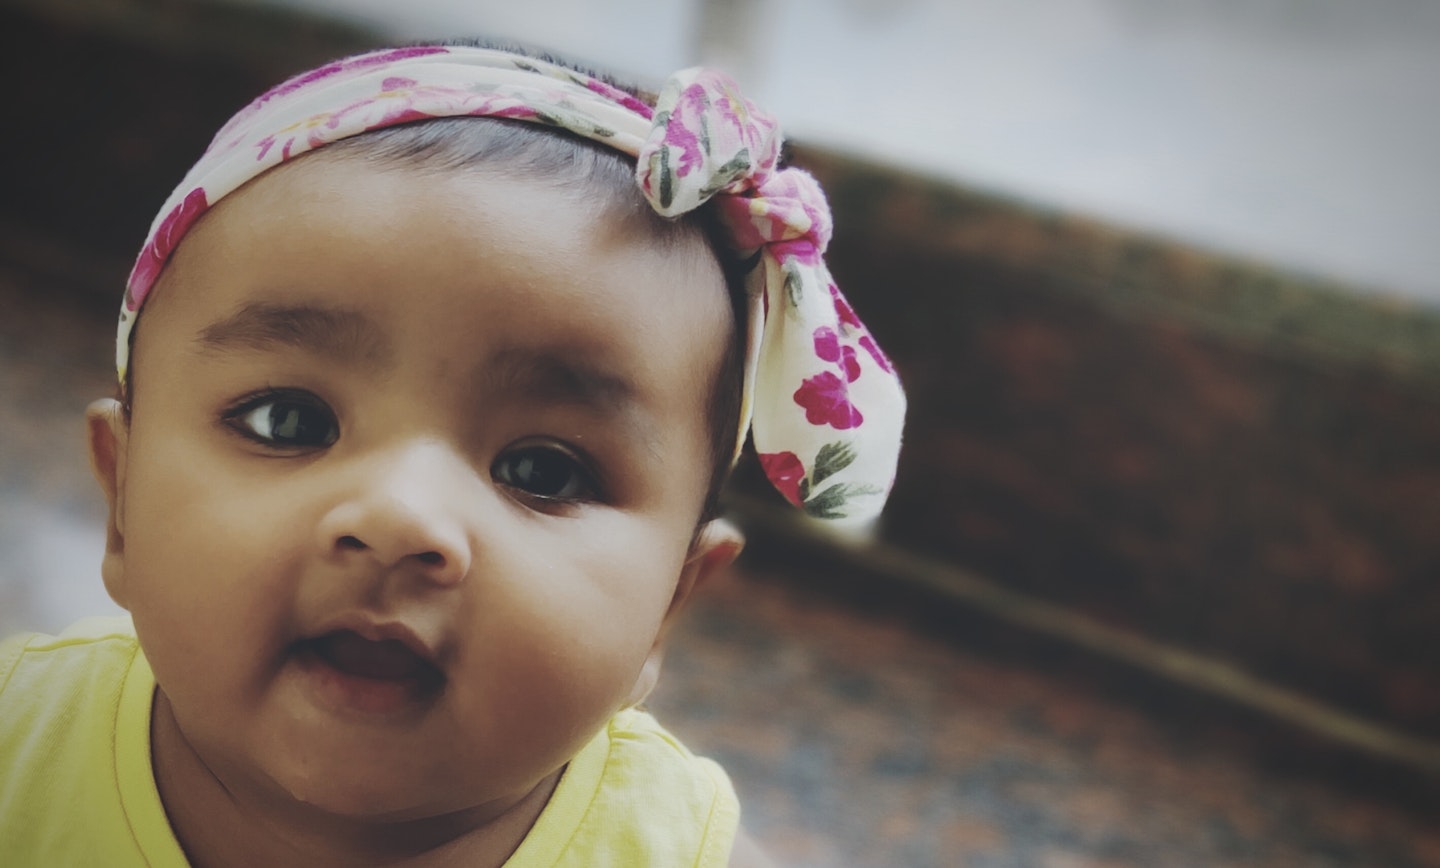 80 Stylish Baby Girl Names With Their Meanings